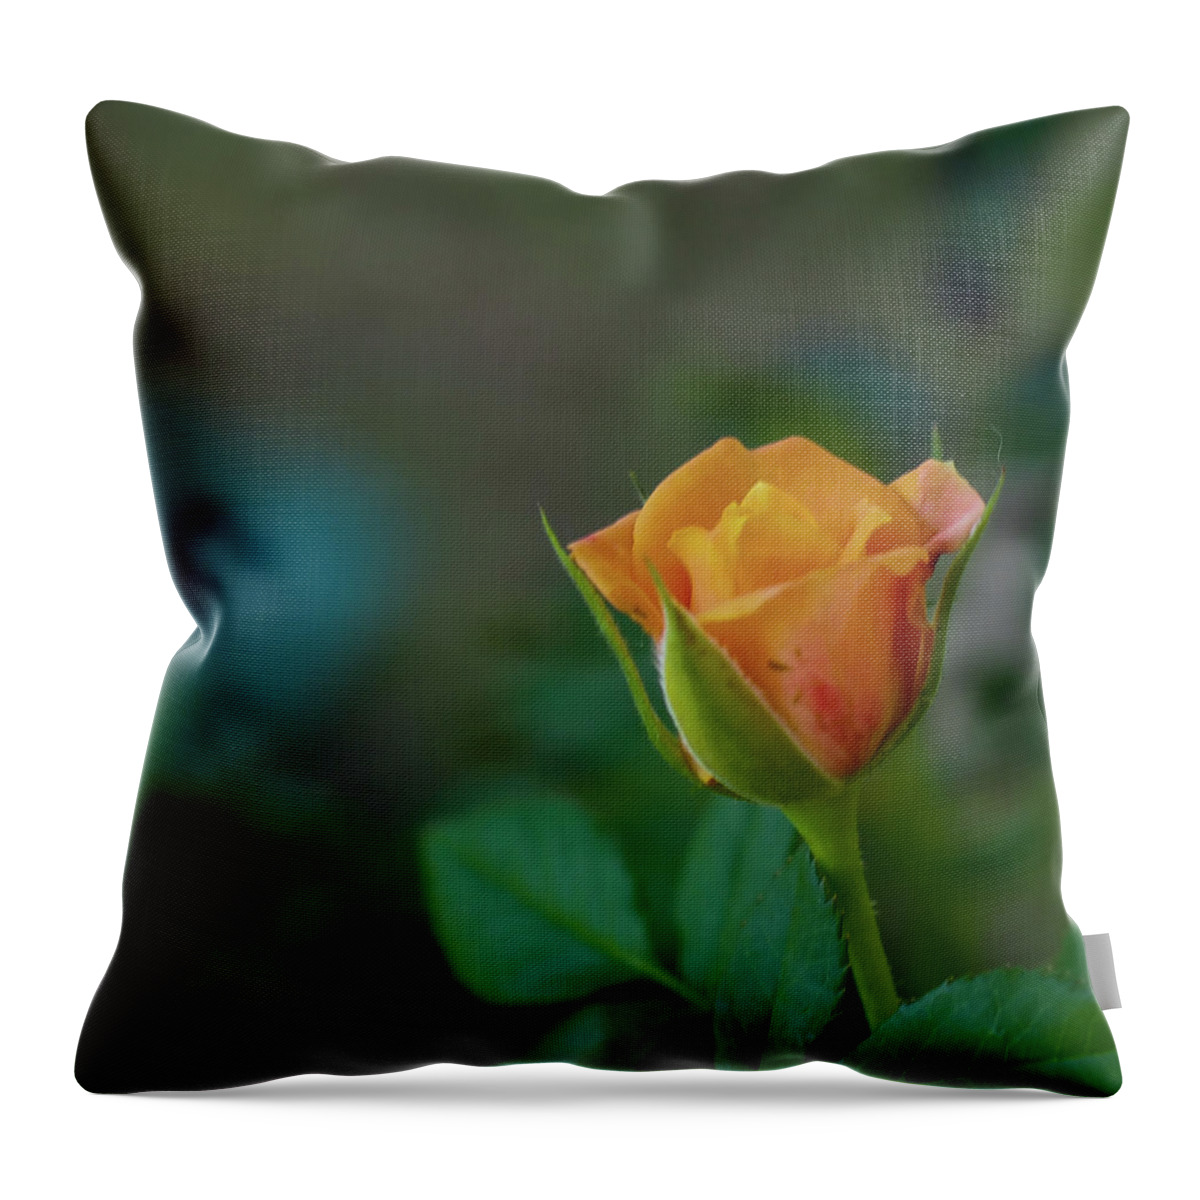 Rose Throw Pillow featuring the photograph Peach Rose 2 by C Winslow Shafer